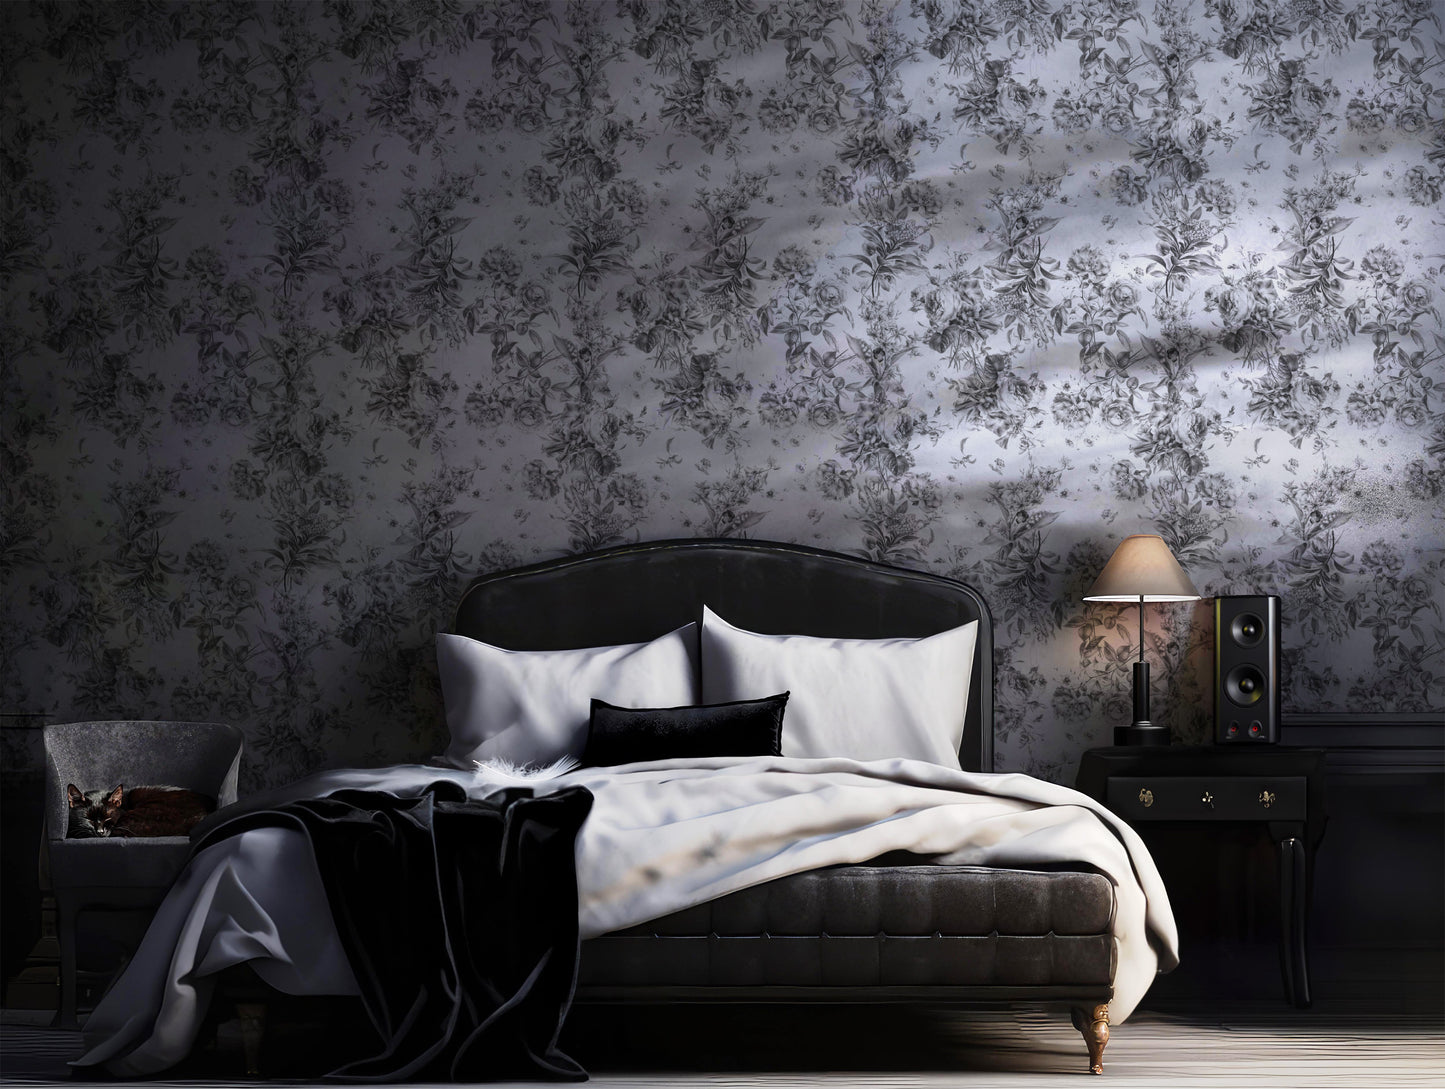 Black and White Floral Toile peel and stick wallpaper in US | RollsRolla